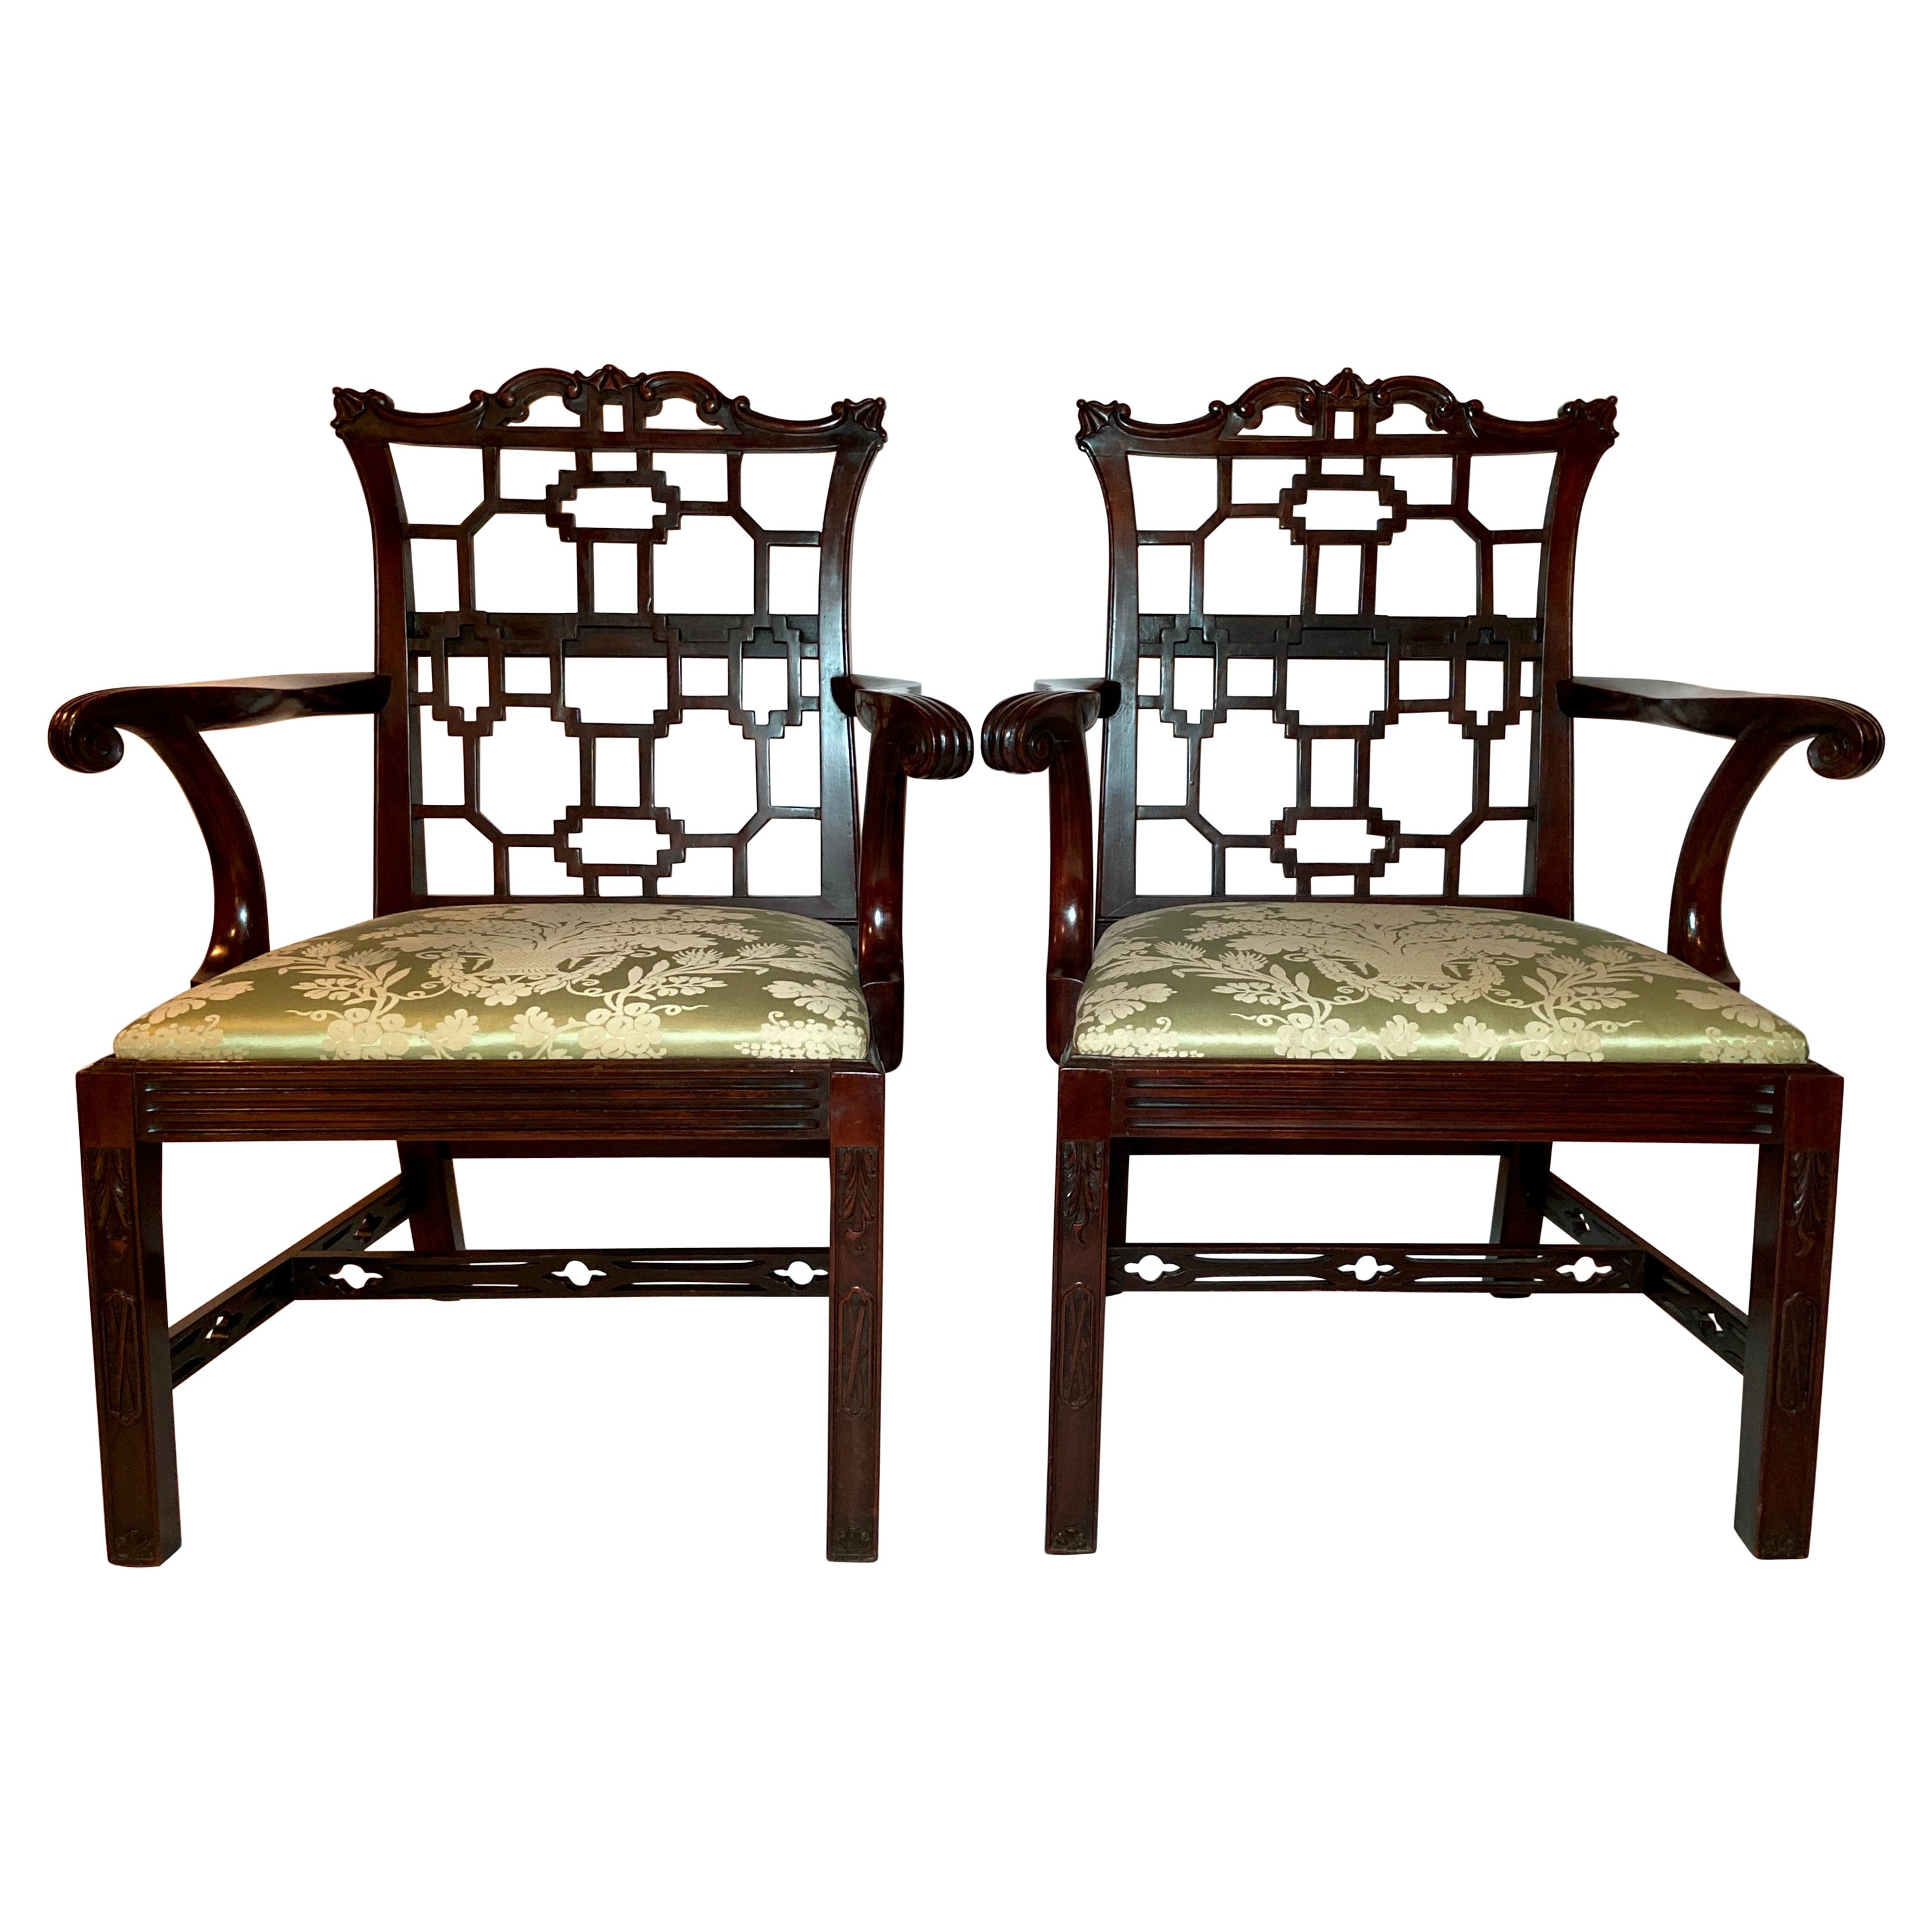 Pair Antique English Chippendale Mahogany Armchairs, circa 1865-1875 For Sale